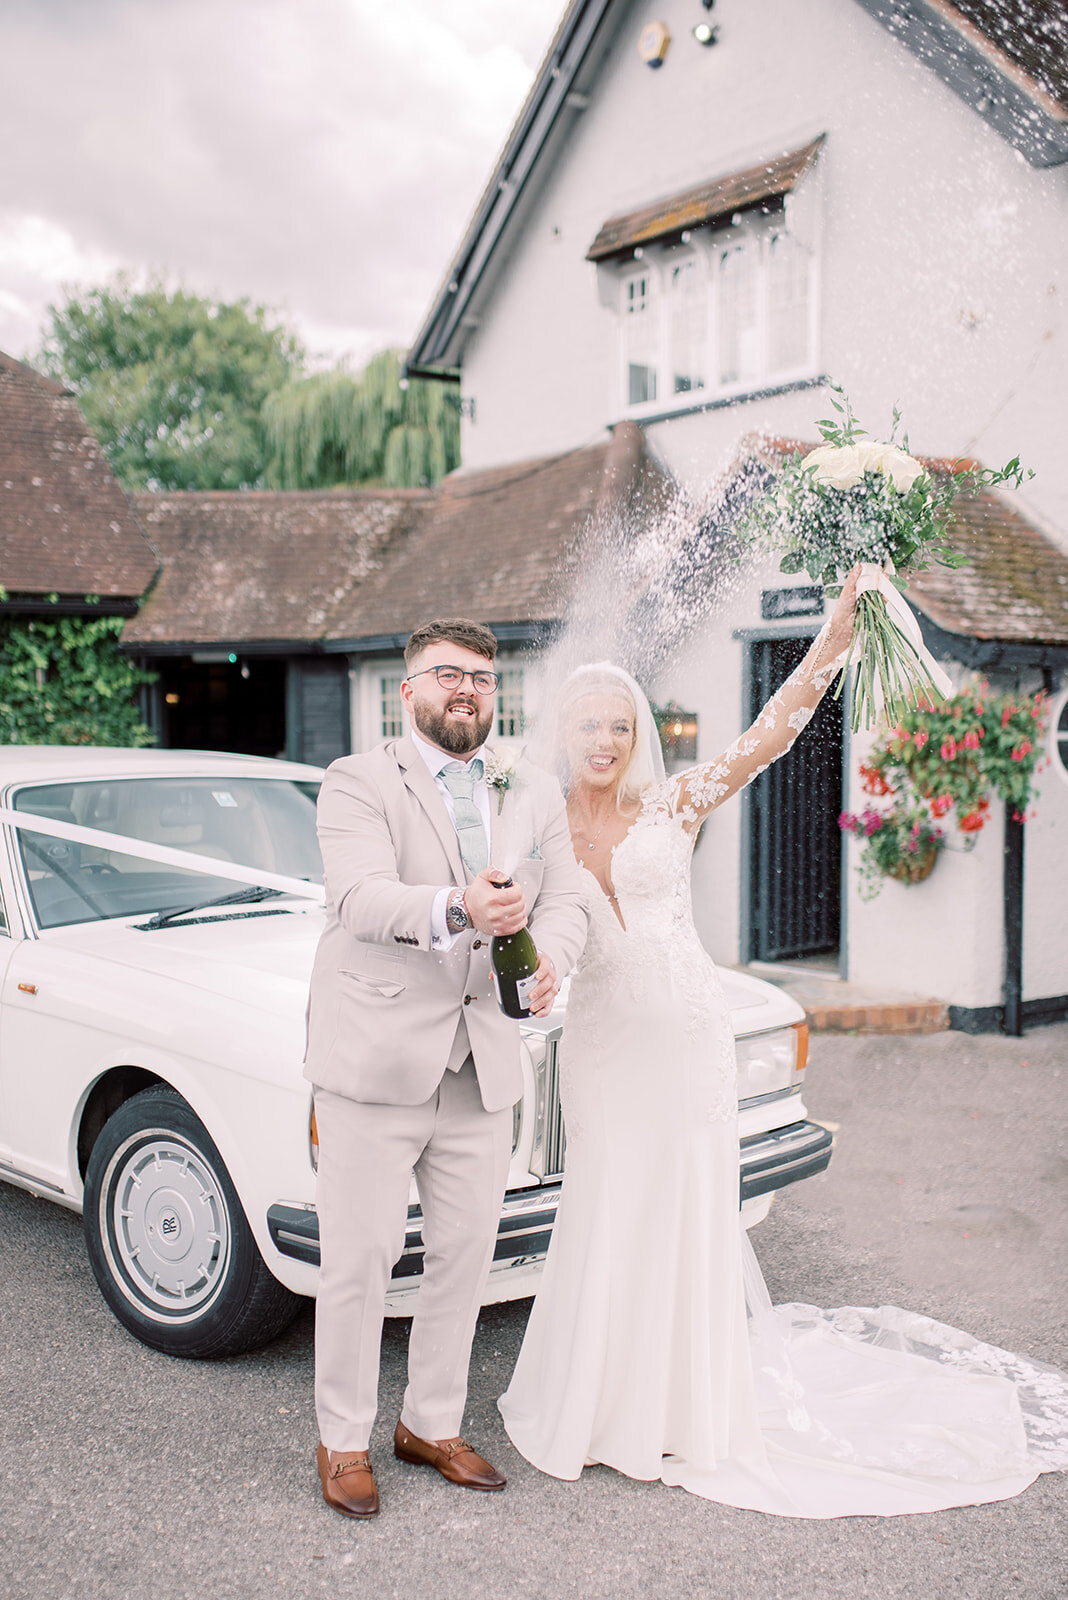 Bride and groom are standing in front of a rolls royce wedding car. spraying a bottle of champagne, the bride has her arm in the air and is smiling as they celebrate. The image is edited in a light and airy style.